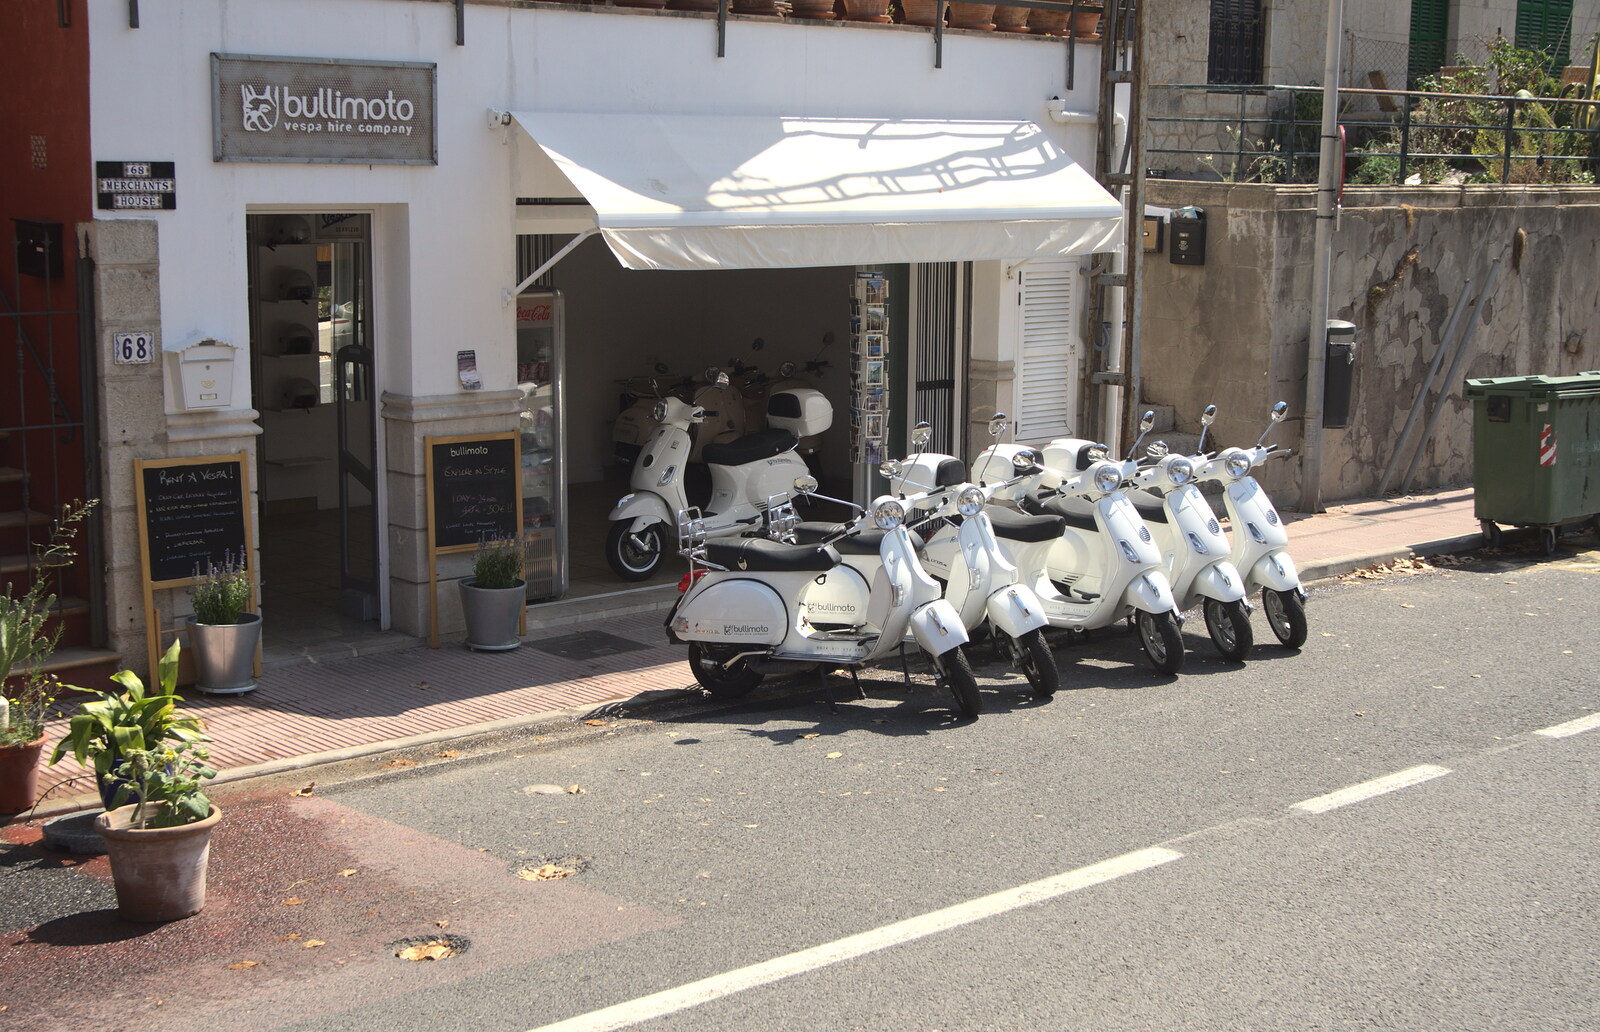 The white mopeds of Bullimoto from A Trip to Sóller, Mallorca, Spain - 8th-14th September 2012